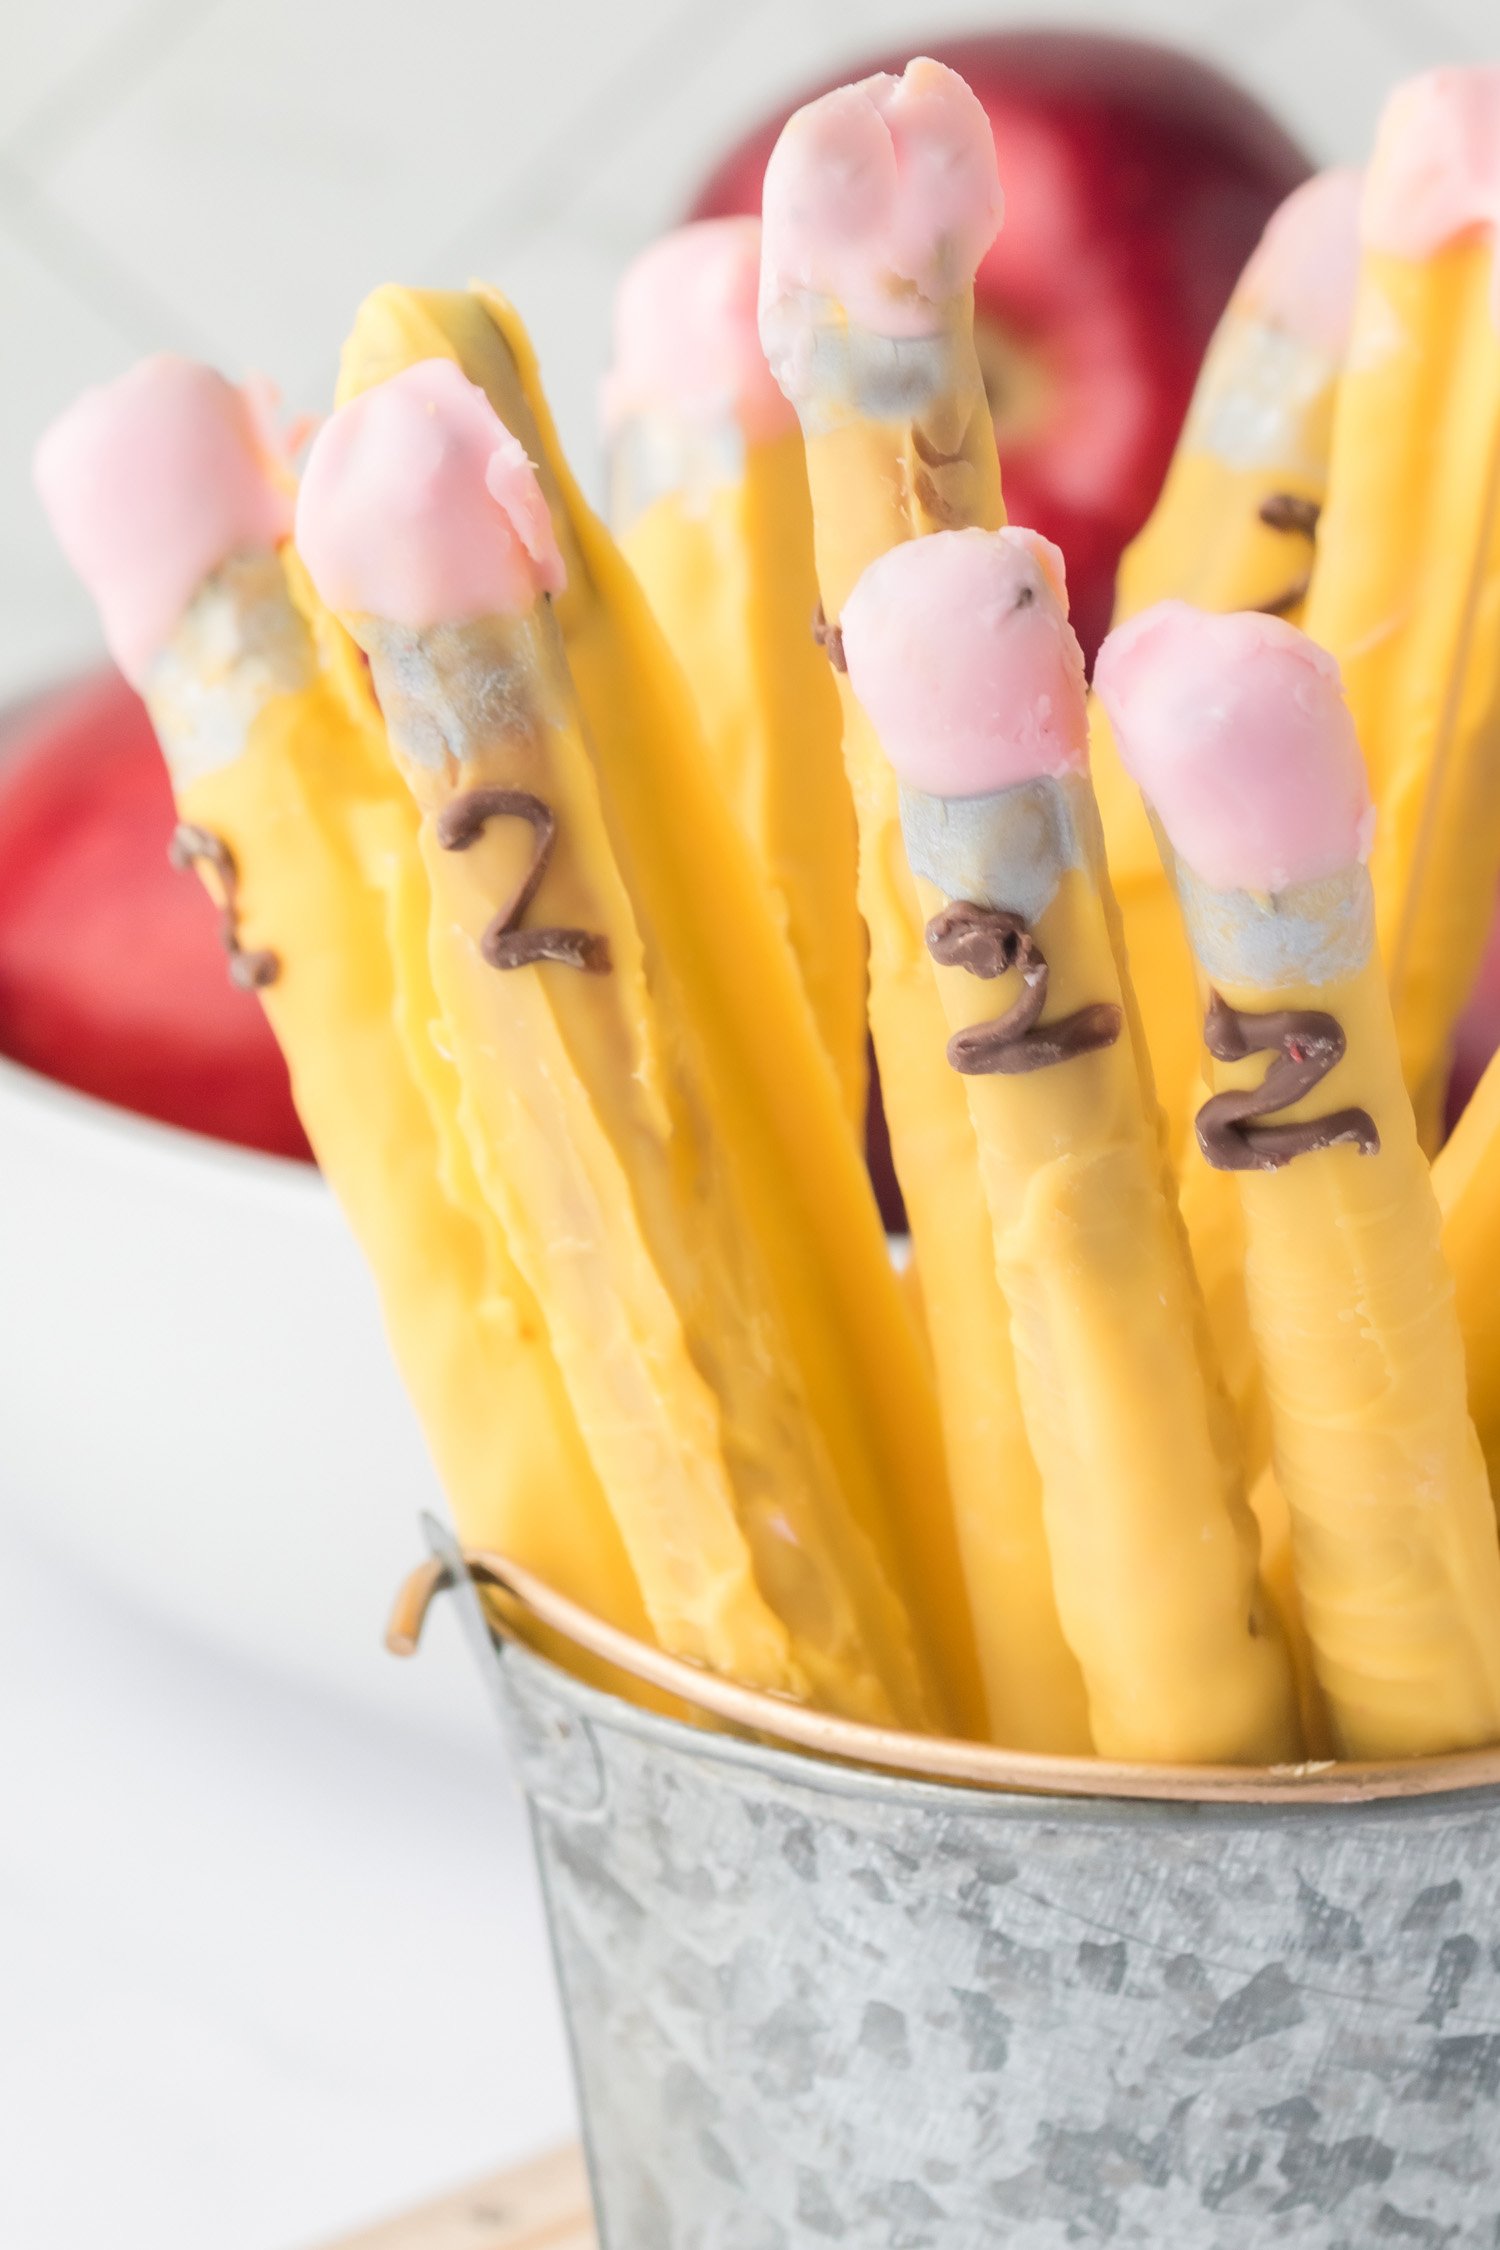 pretzels dipped in chocolate to look like pencils in tin can